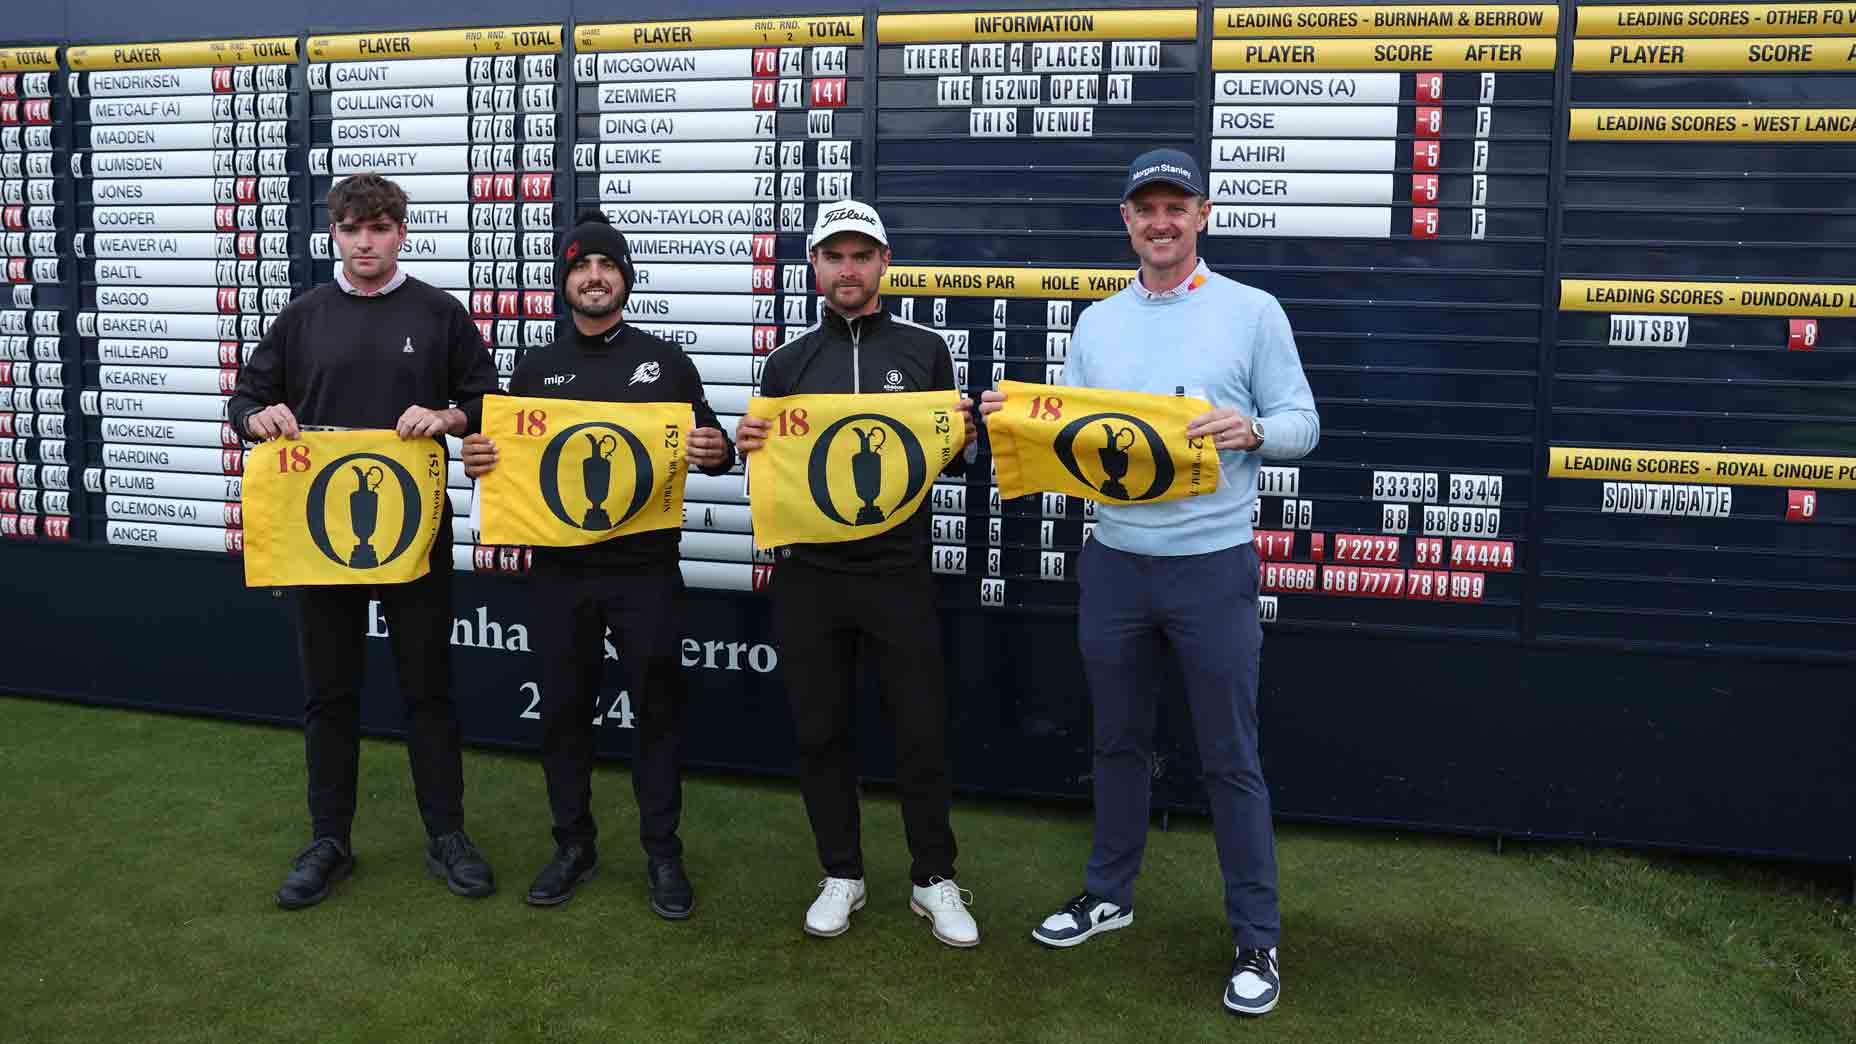 Open Championship Final qualifiers (including Justin Rose) hold Open Championship flags.